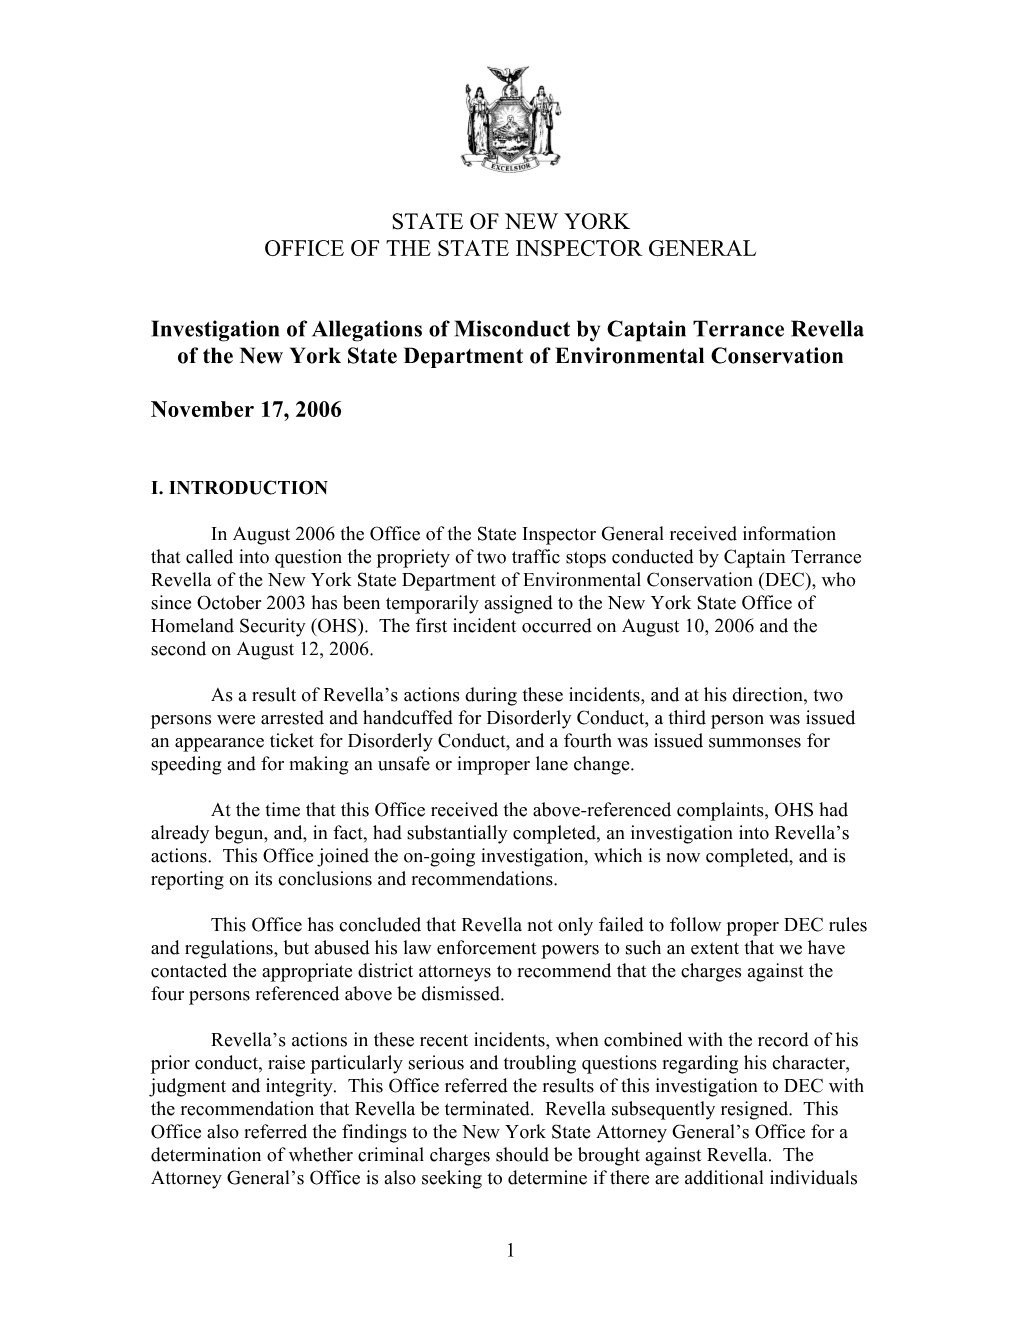 Investigation of Allegations of Misconduct by Captain Terrance Revella